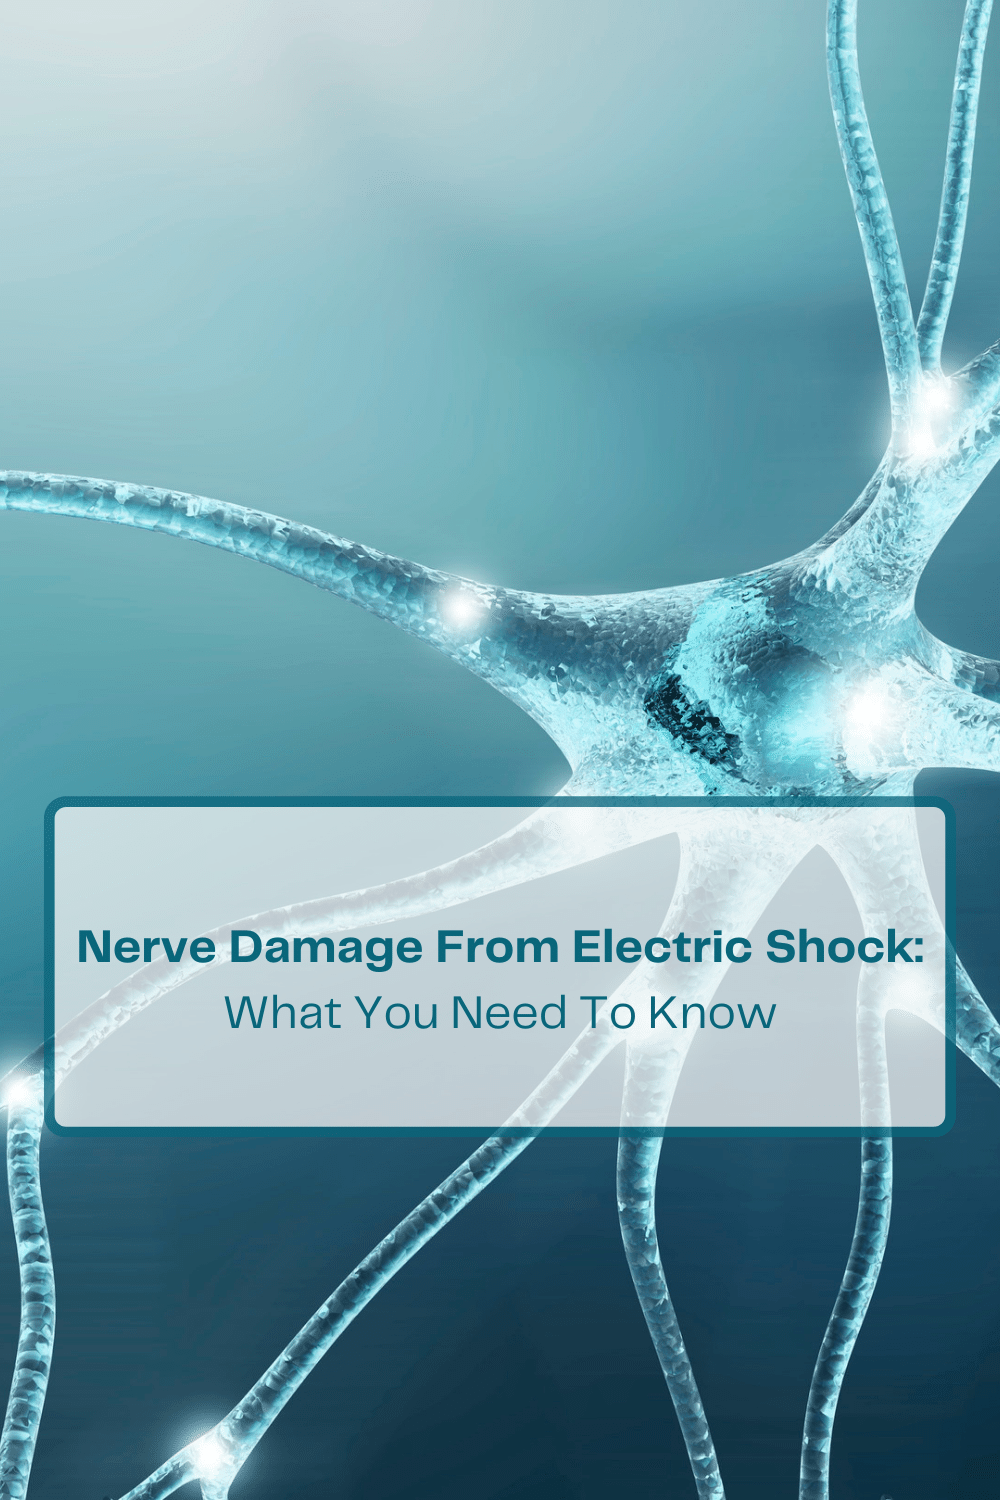 Nerve Damage From Electric Shock: What You Need To Know